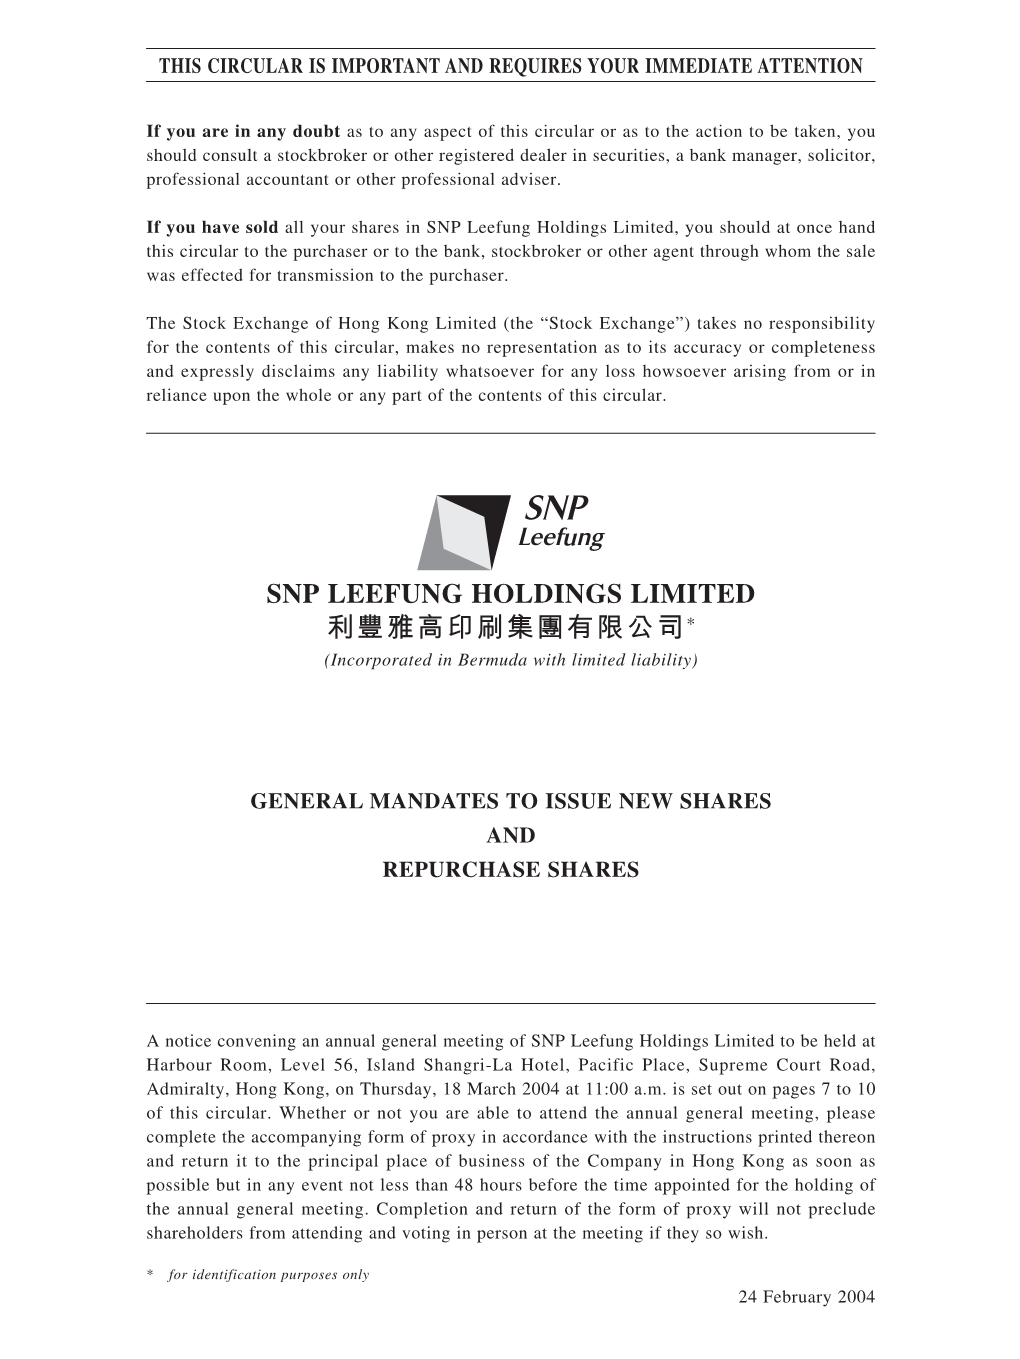 SNP LEEFUNG HOLDINGS LIMITED 利豐雅高印刷集團有限公司* (Incorporated in Bermuda with Limited Liability)